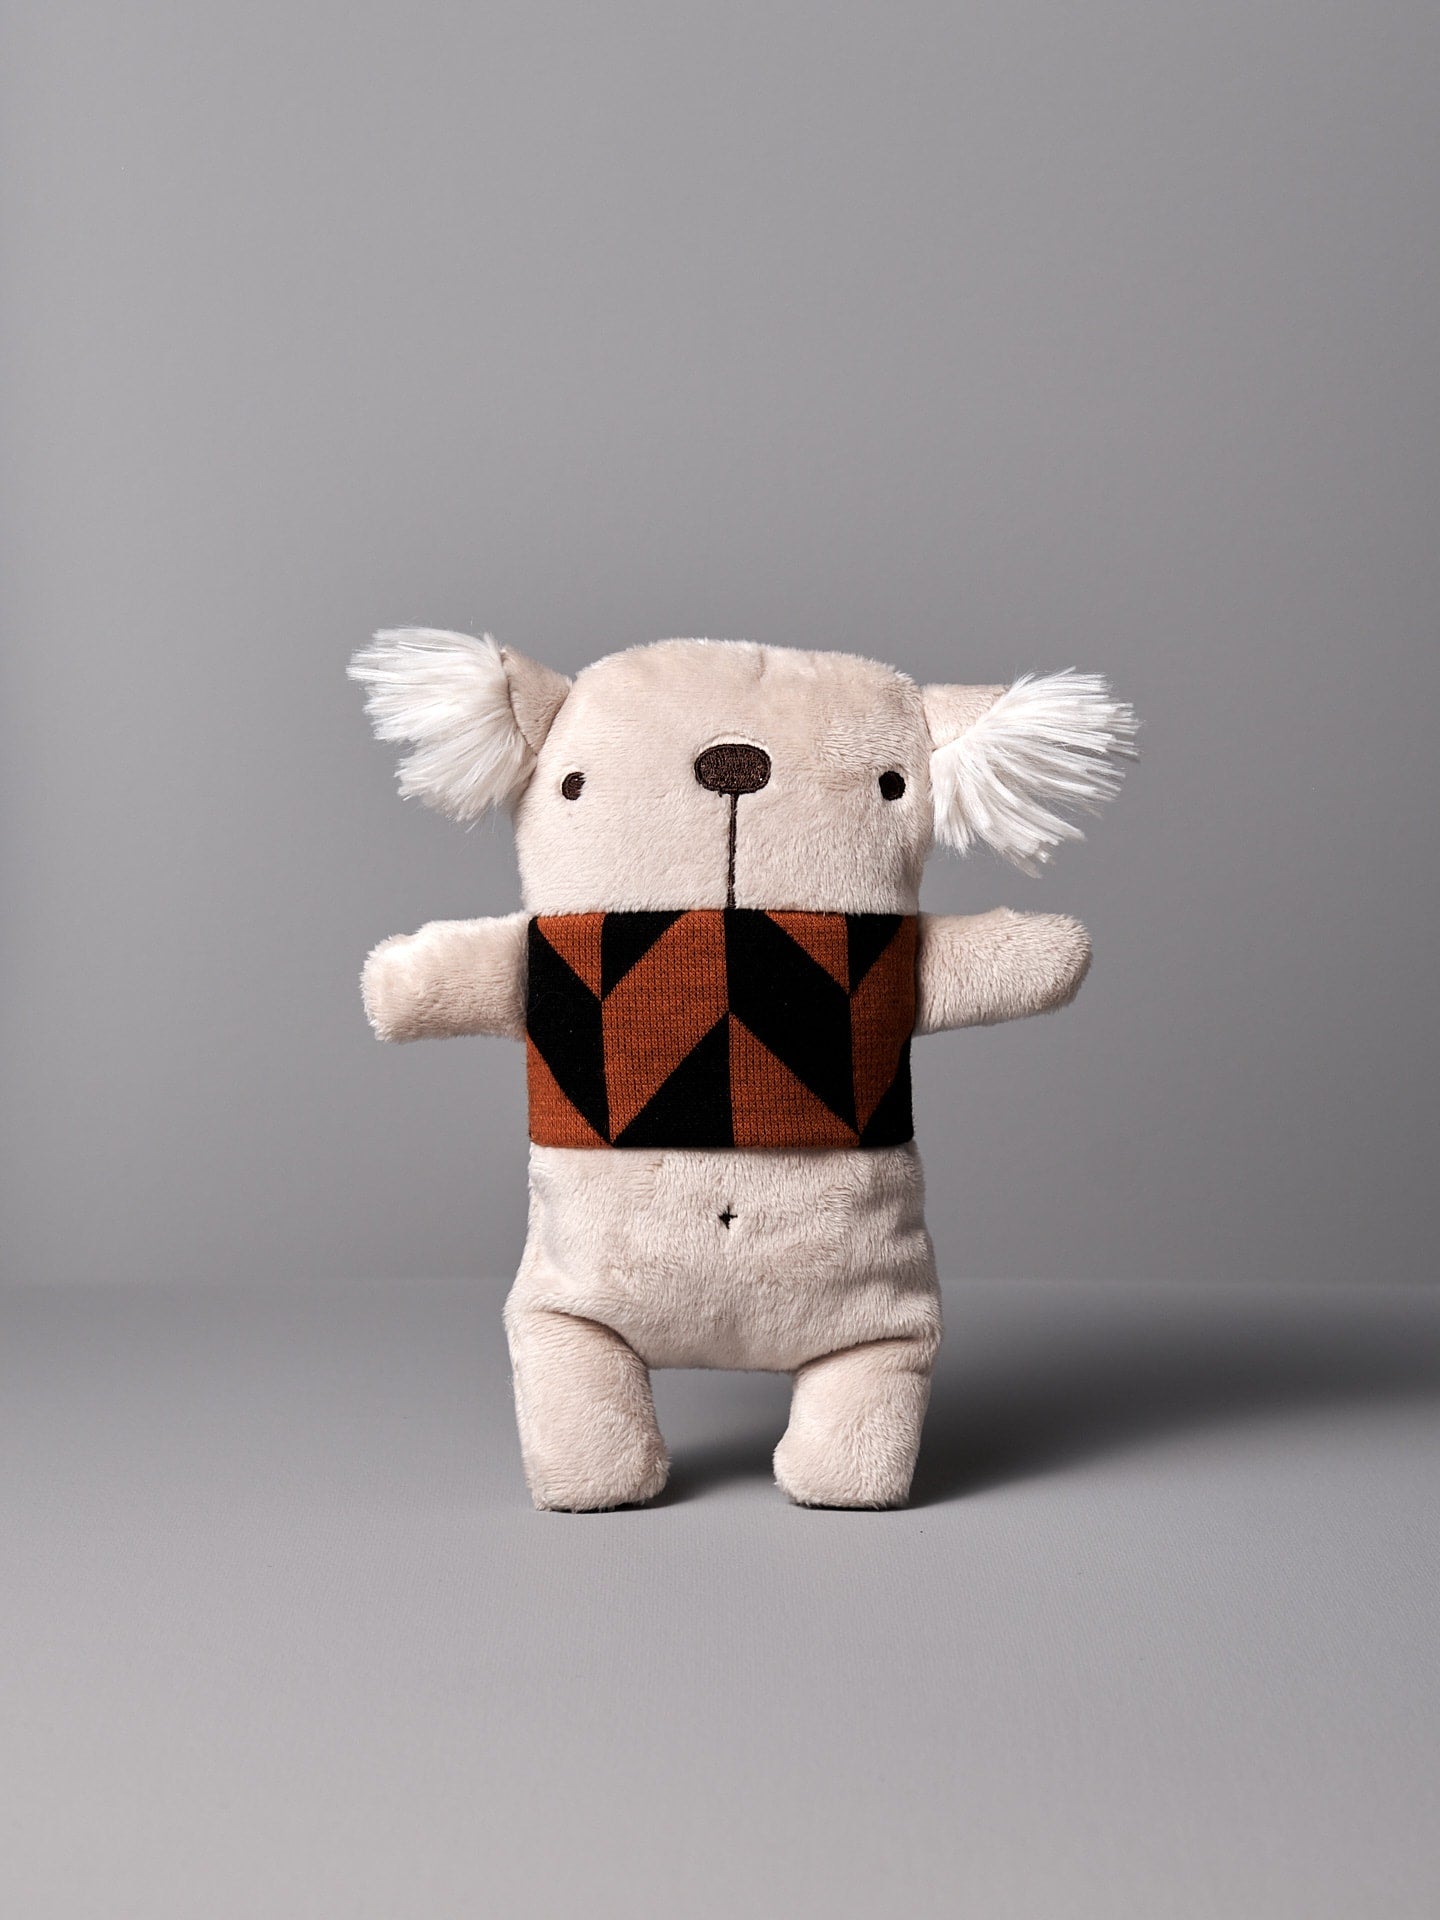 A Gilles le Koala No.2 stuffed animal with a brown and black scarf by Raplapla.